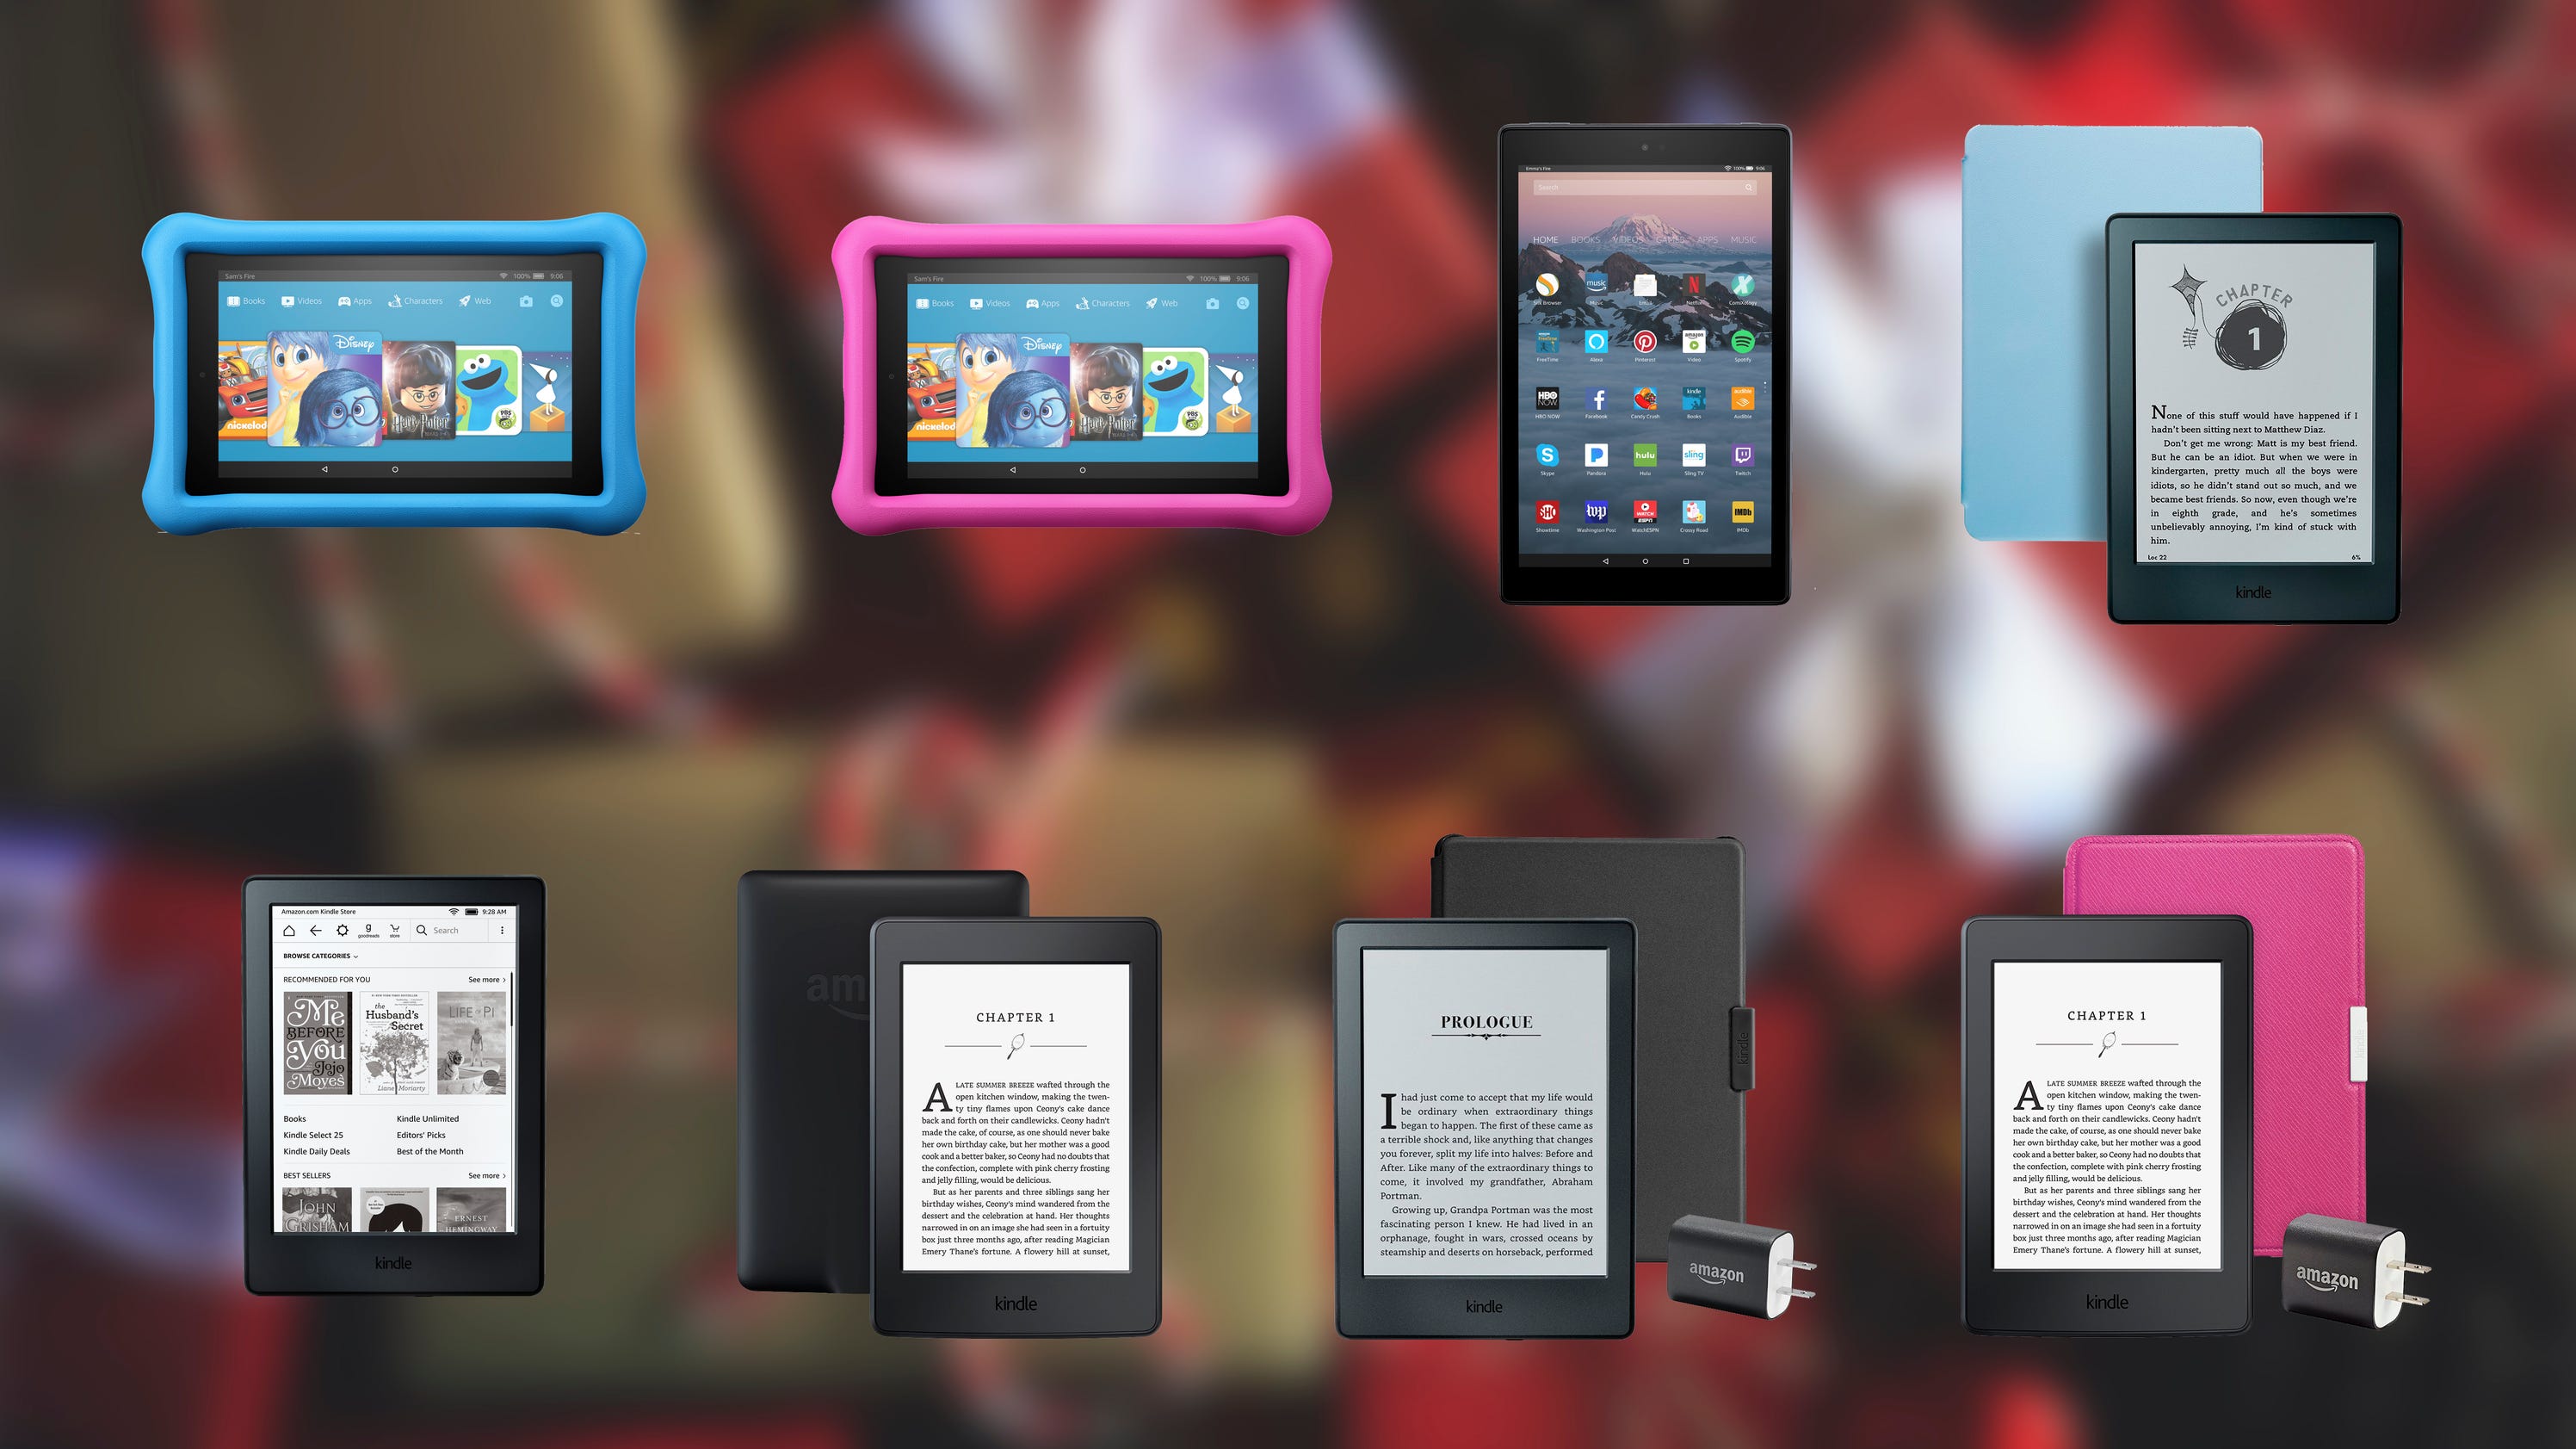 Cyber Monday 2017: 8 awesome Amazon Fire tablet and Kindle deals you can get right now